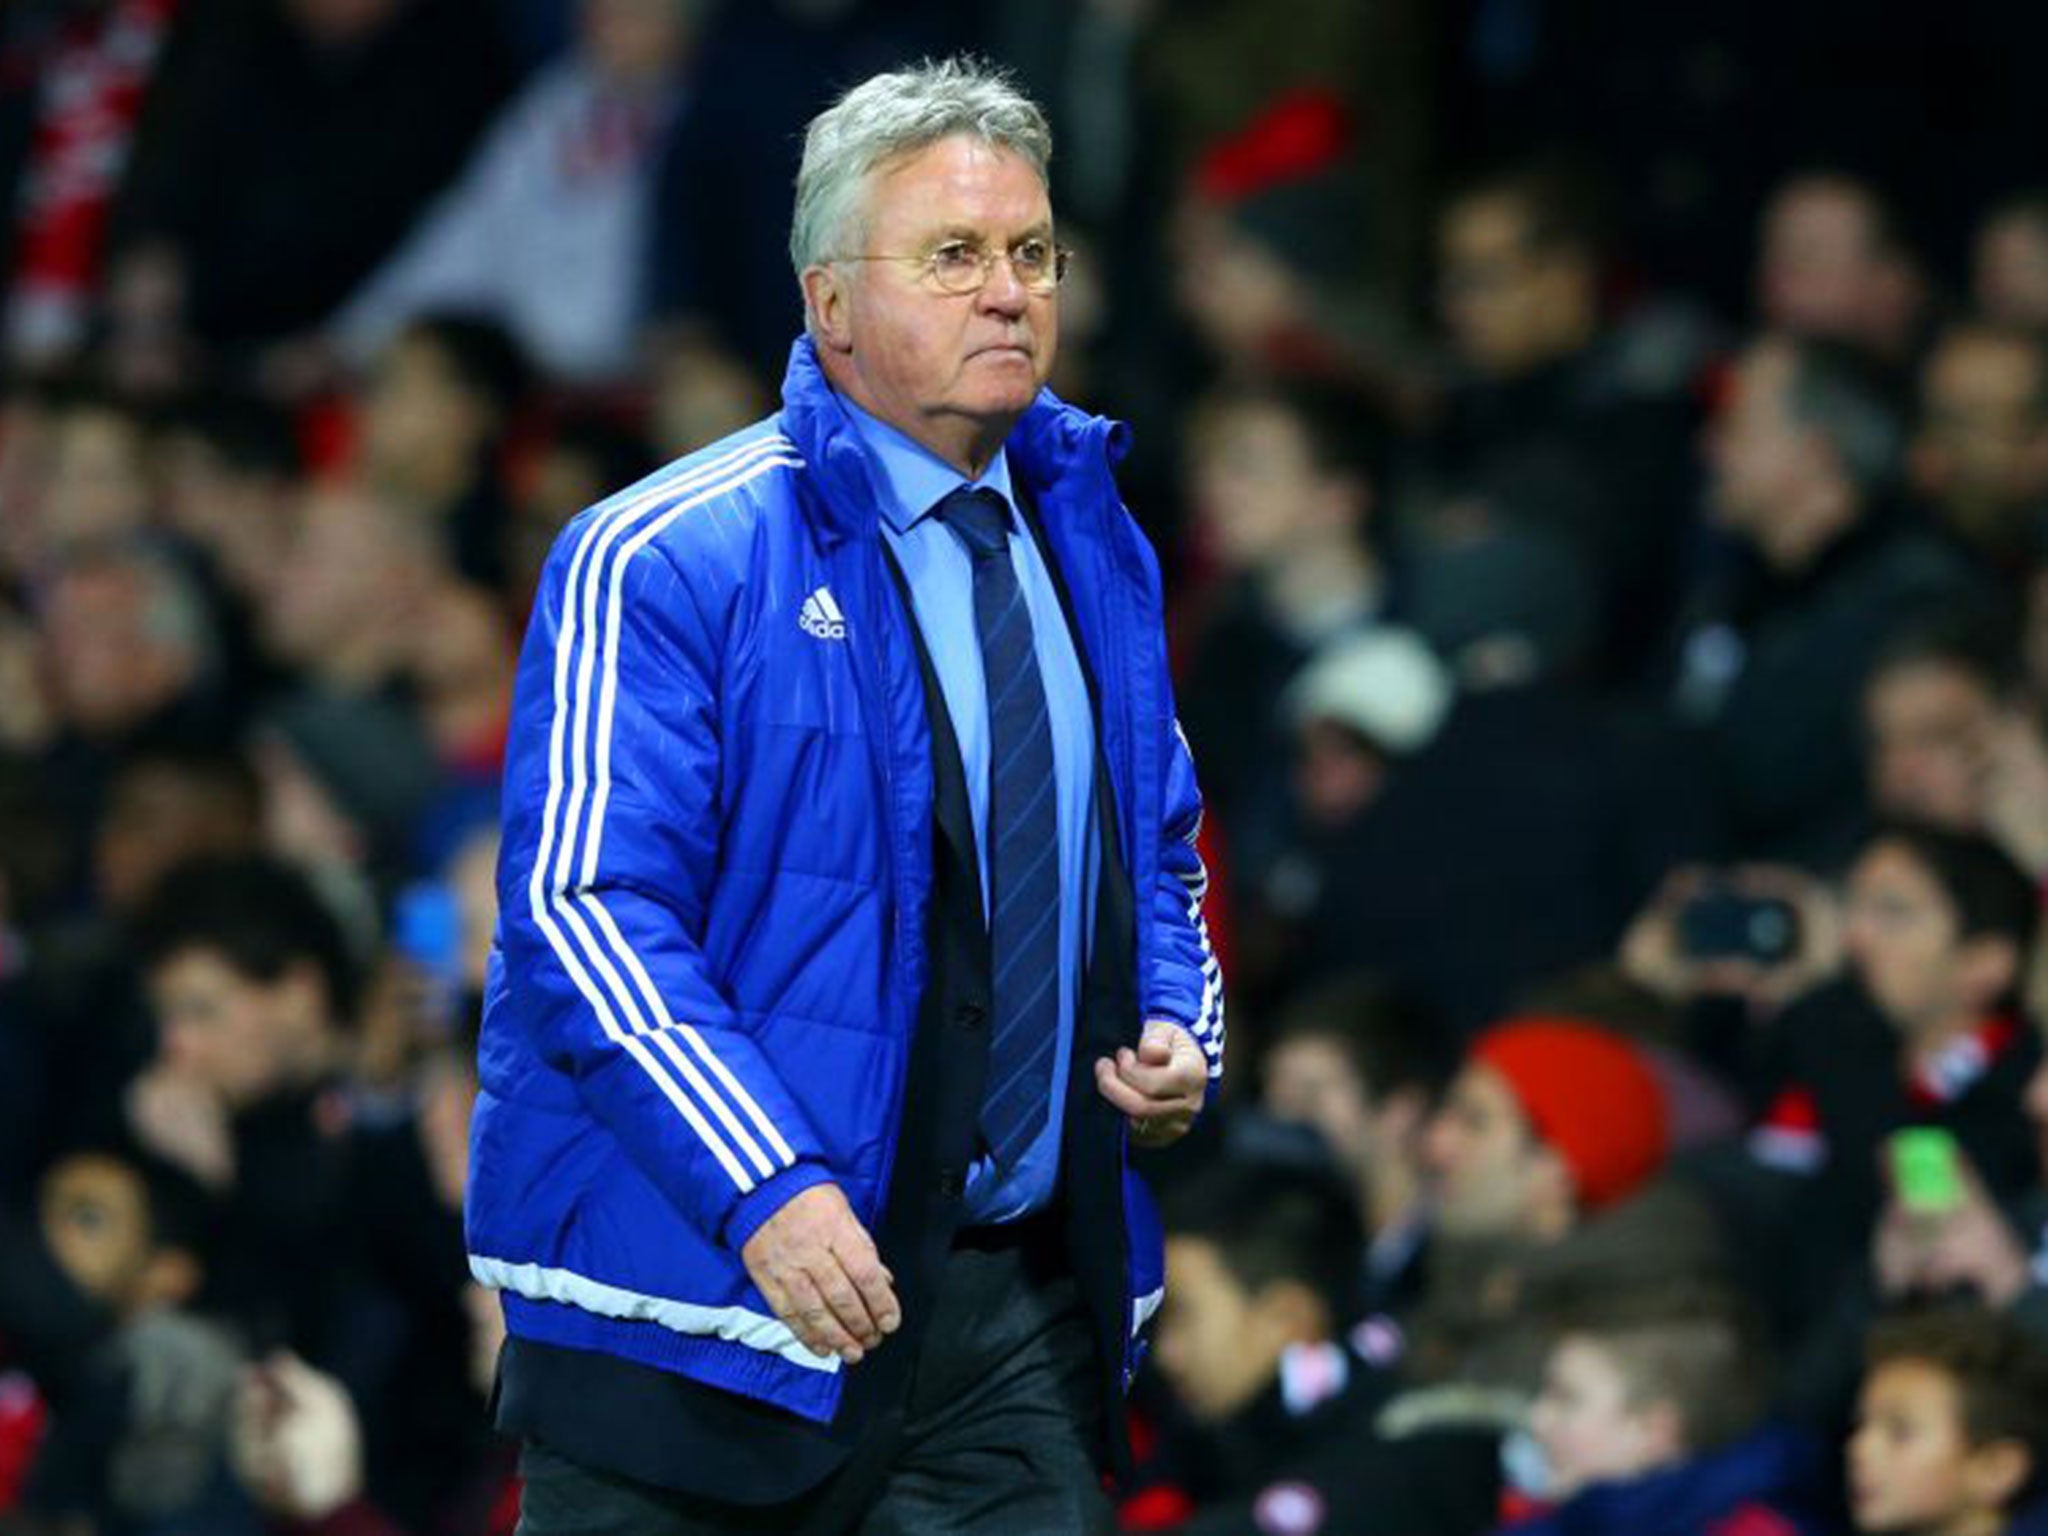 Guus Hiddink's Chelsea team are still feeling the aftershocks of Jose Mourinho’s departure